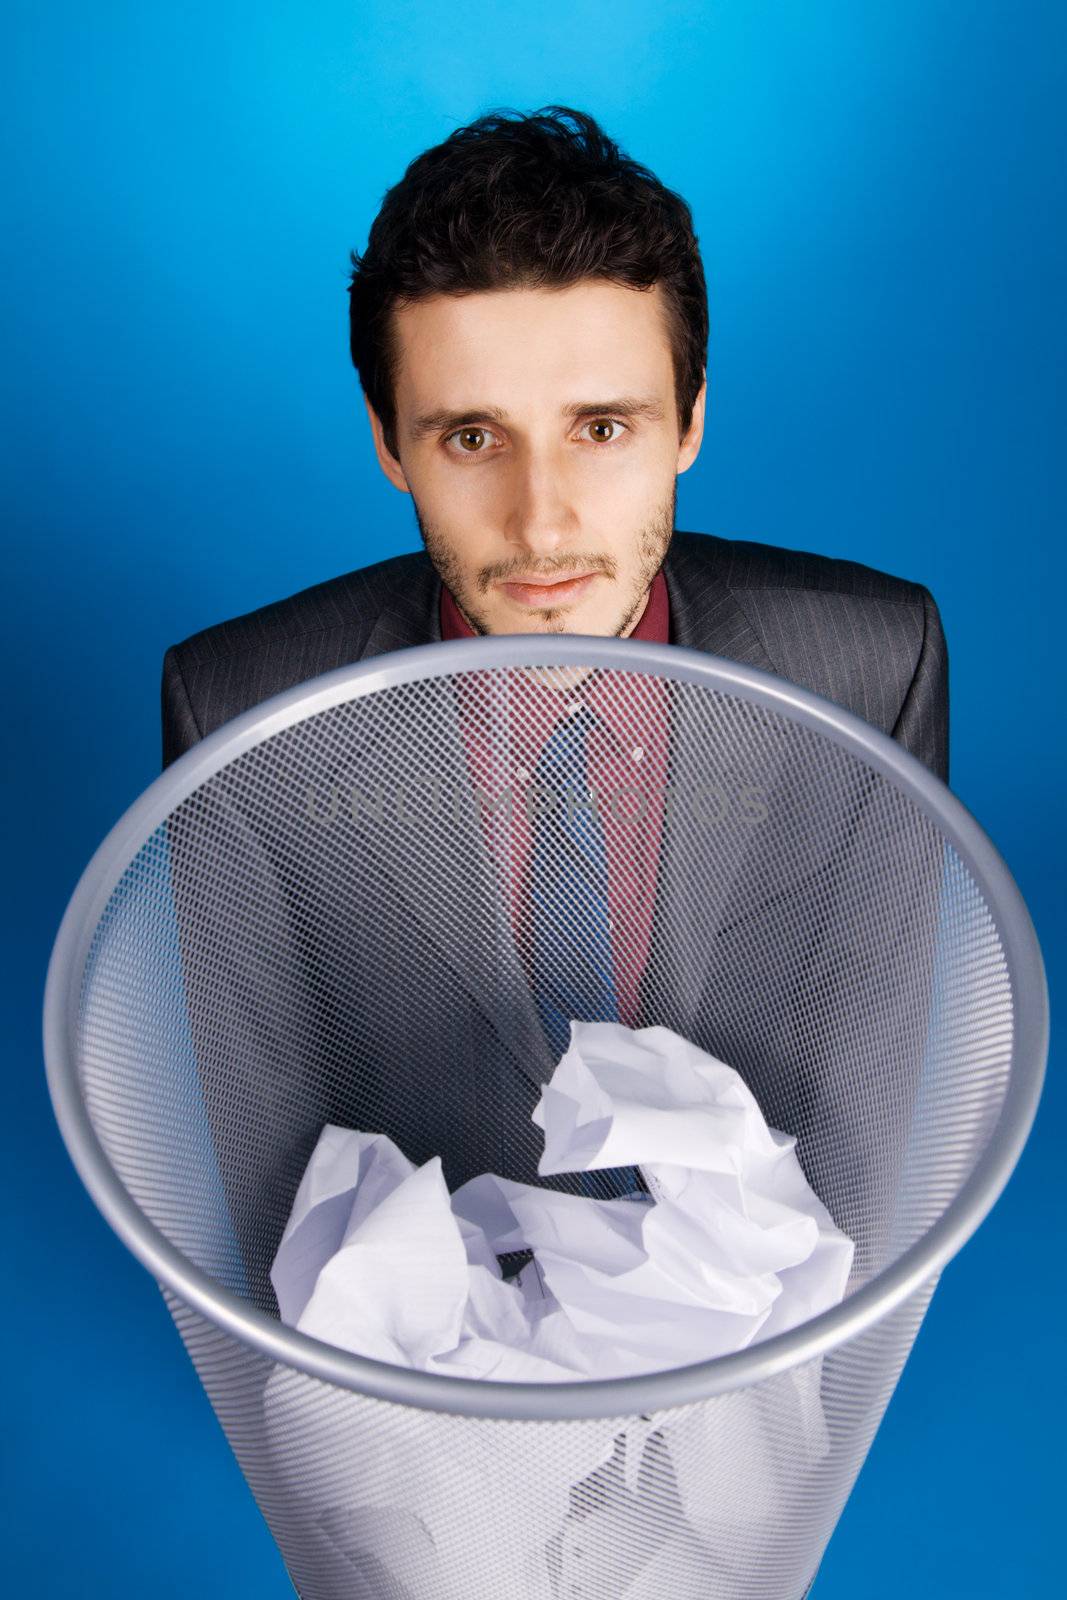 Young businessman playing baskteball with crumpled paper, blue background